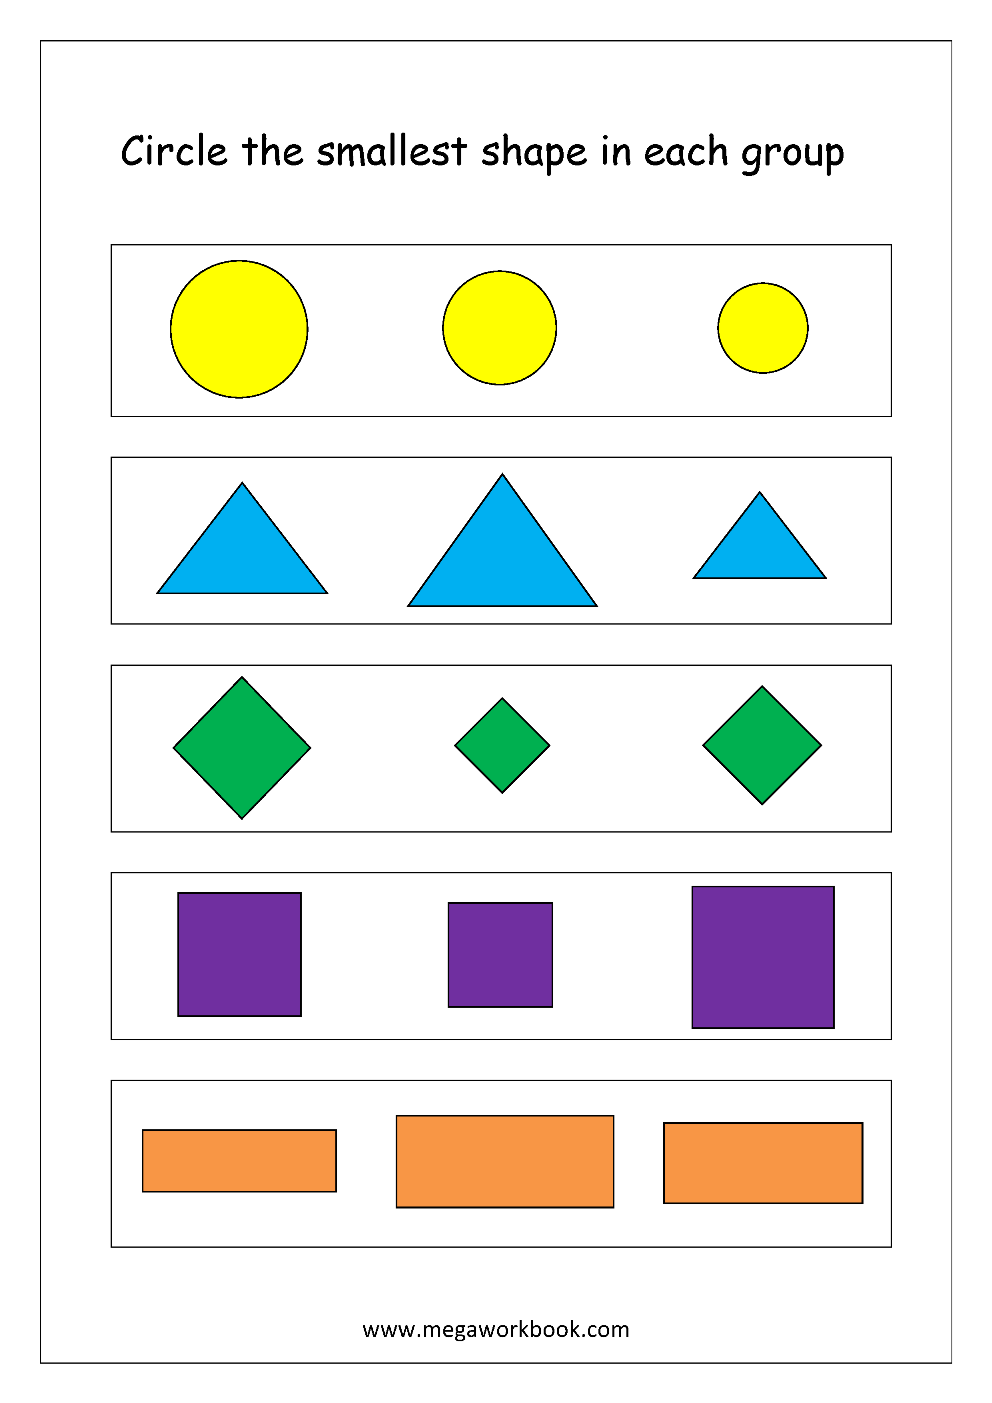 Big vs small size comparison worksheets for preschool and